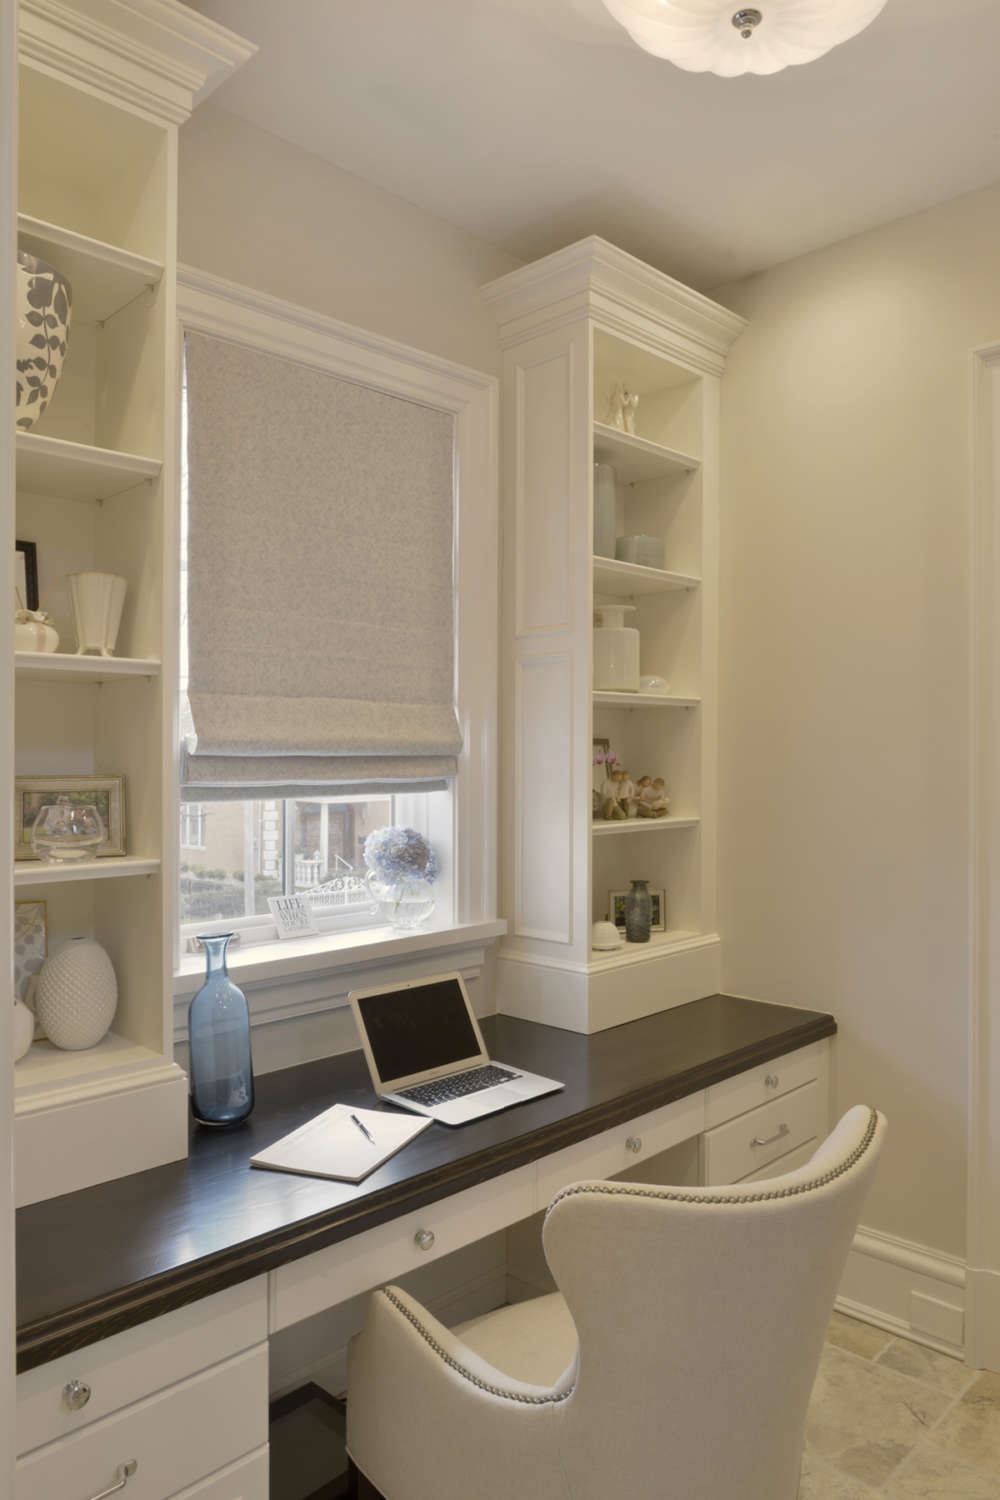 Home office features a classic white painted, custom desk with round polished stainless hardware and espresso brown top. The desk is positioned under a window with flax colored roman fabric shade flanked by custom white painted built-in open shelving. Design by Tom Vecchio of Bilotta Kitchens.